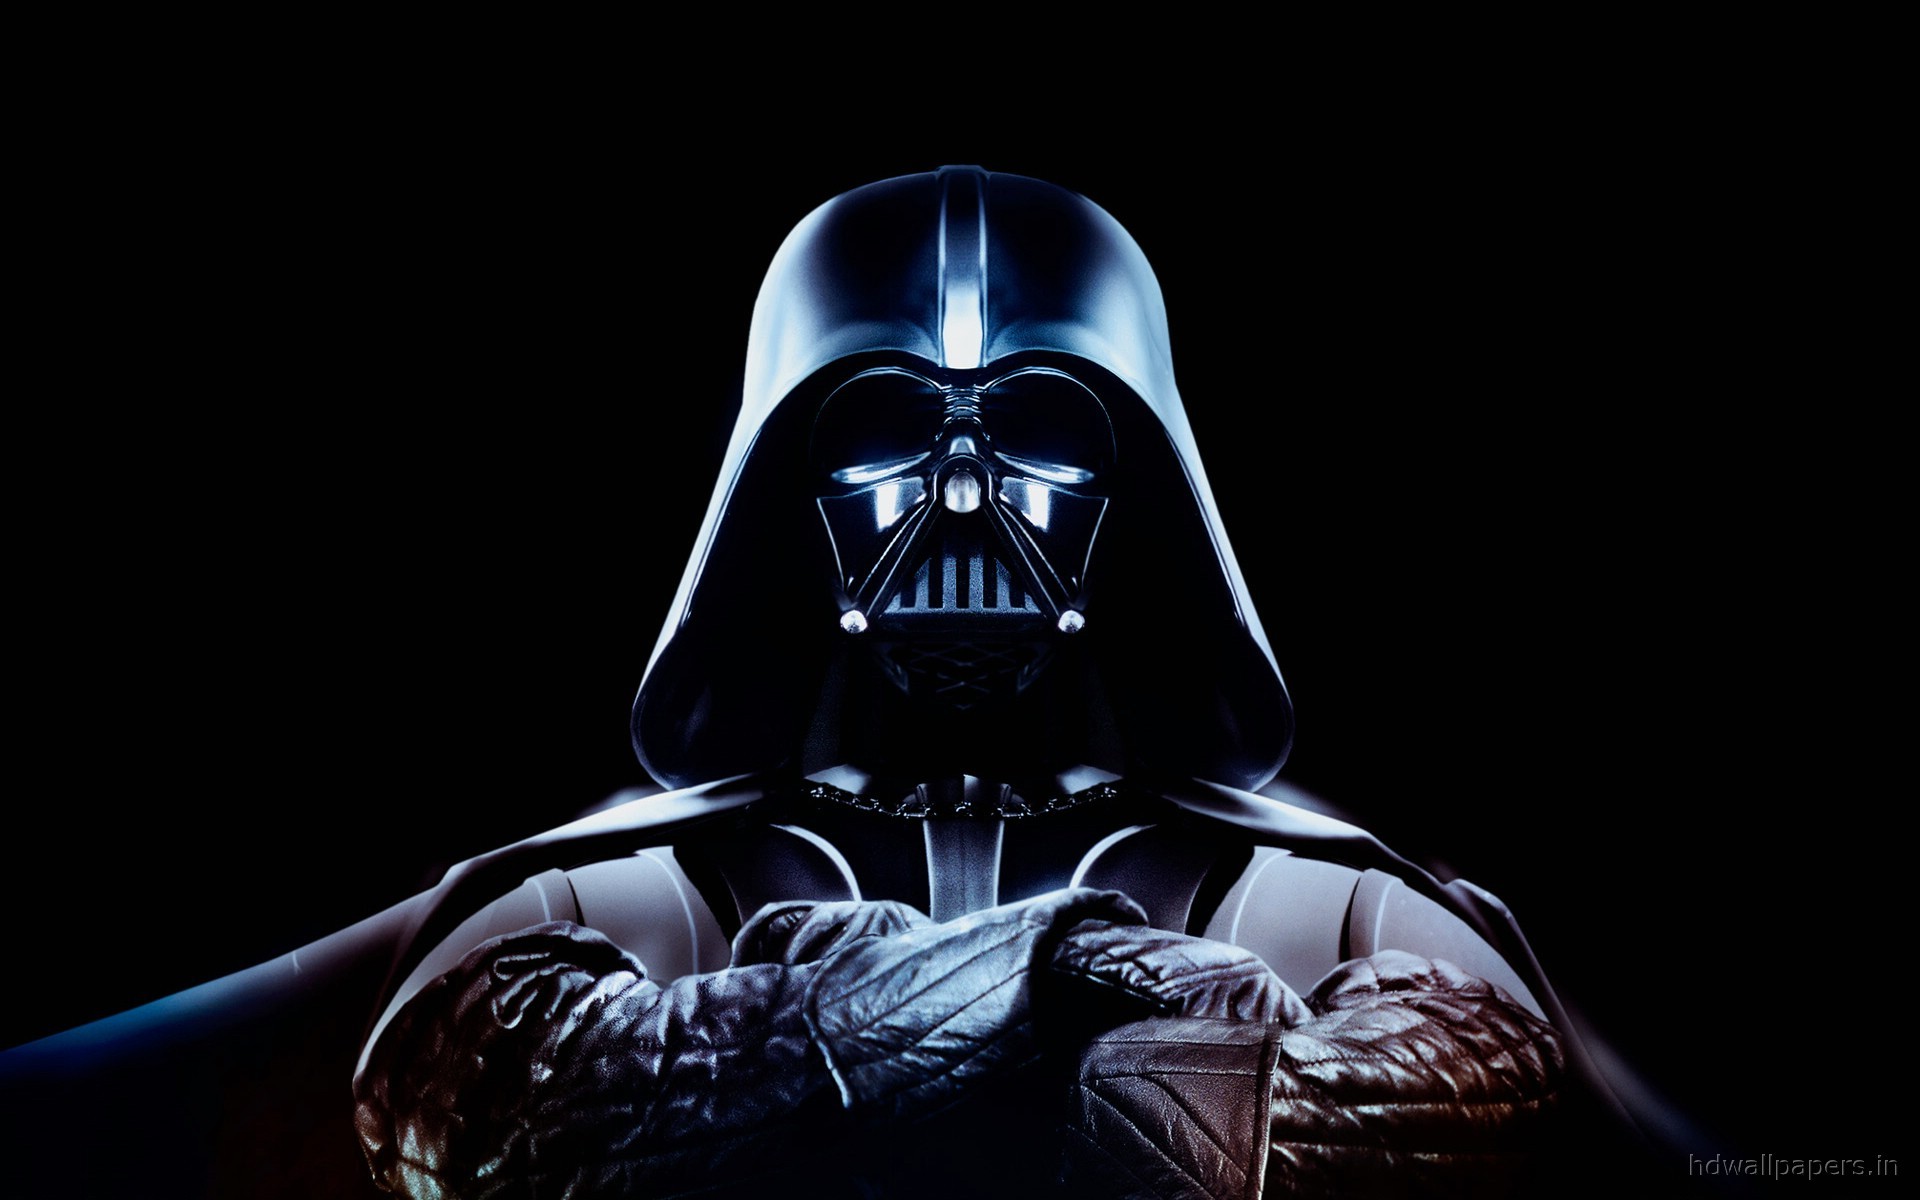 General 1920x1200 Star Wars Darth Vader black background Star Wars Villains Sith science fiction movie characters